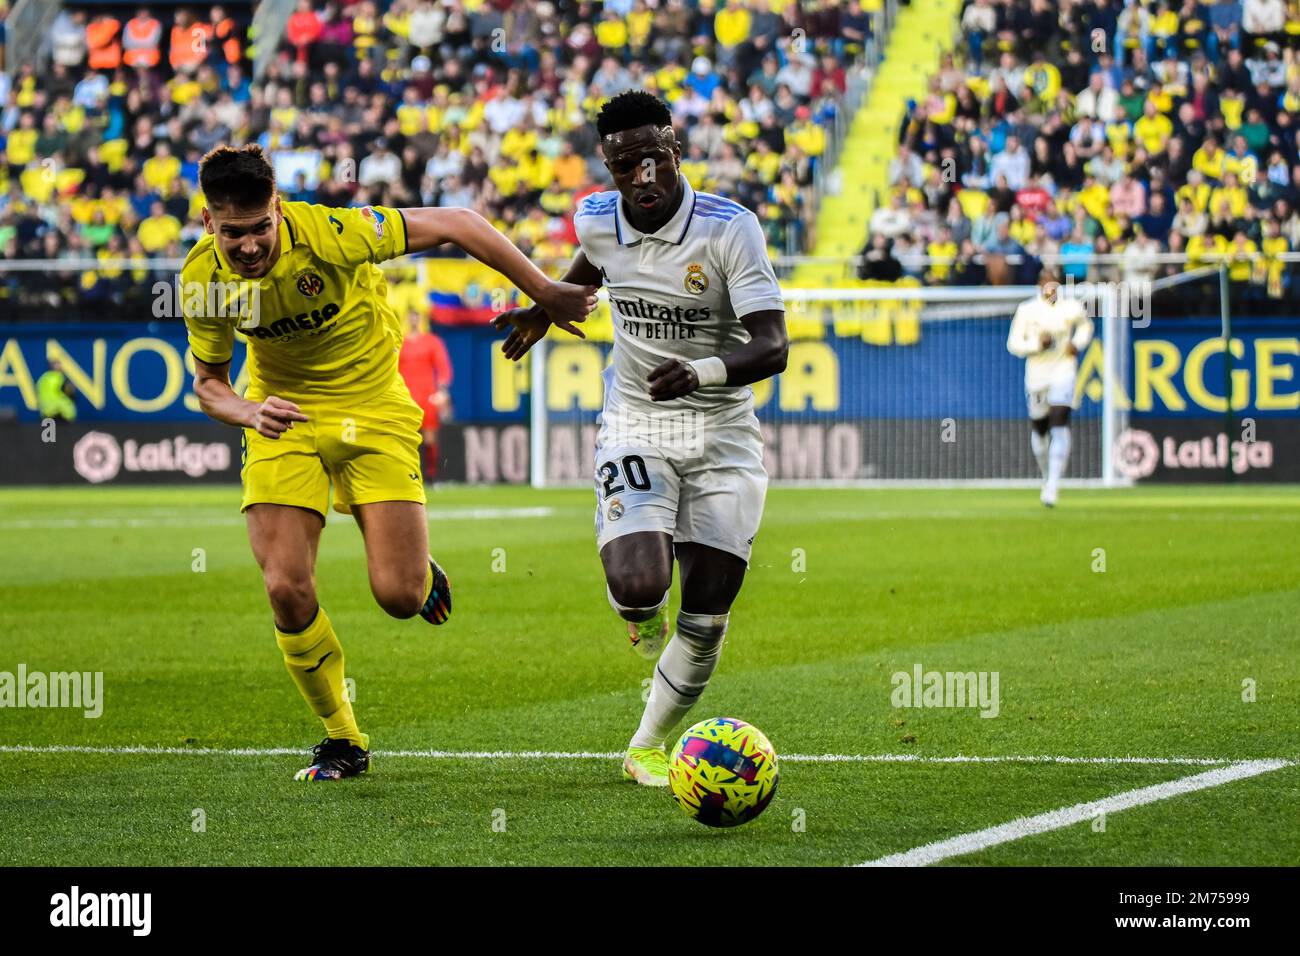 VILLARREAL, SPAIN - JANUARY 7: Vinicius Jr of Real Madrid CF run with the ball during the match between Villarreal CF and Real Madrid CF of La Liga Santander on January 7, 2023 at Estadi de la Ceramica in Villarreal, Spain. (Photo by Samuel Carreño/ PX Images) Credit: Px Images/Alamy Live News Stock Photo